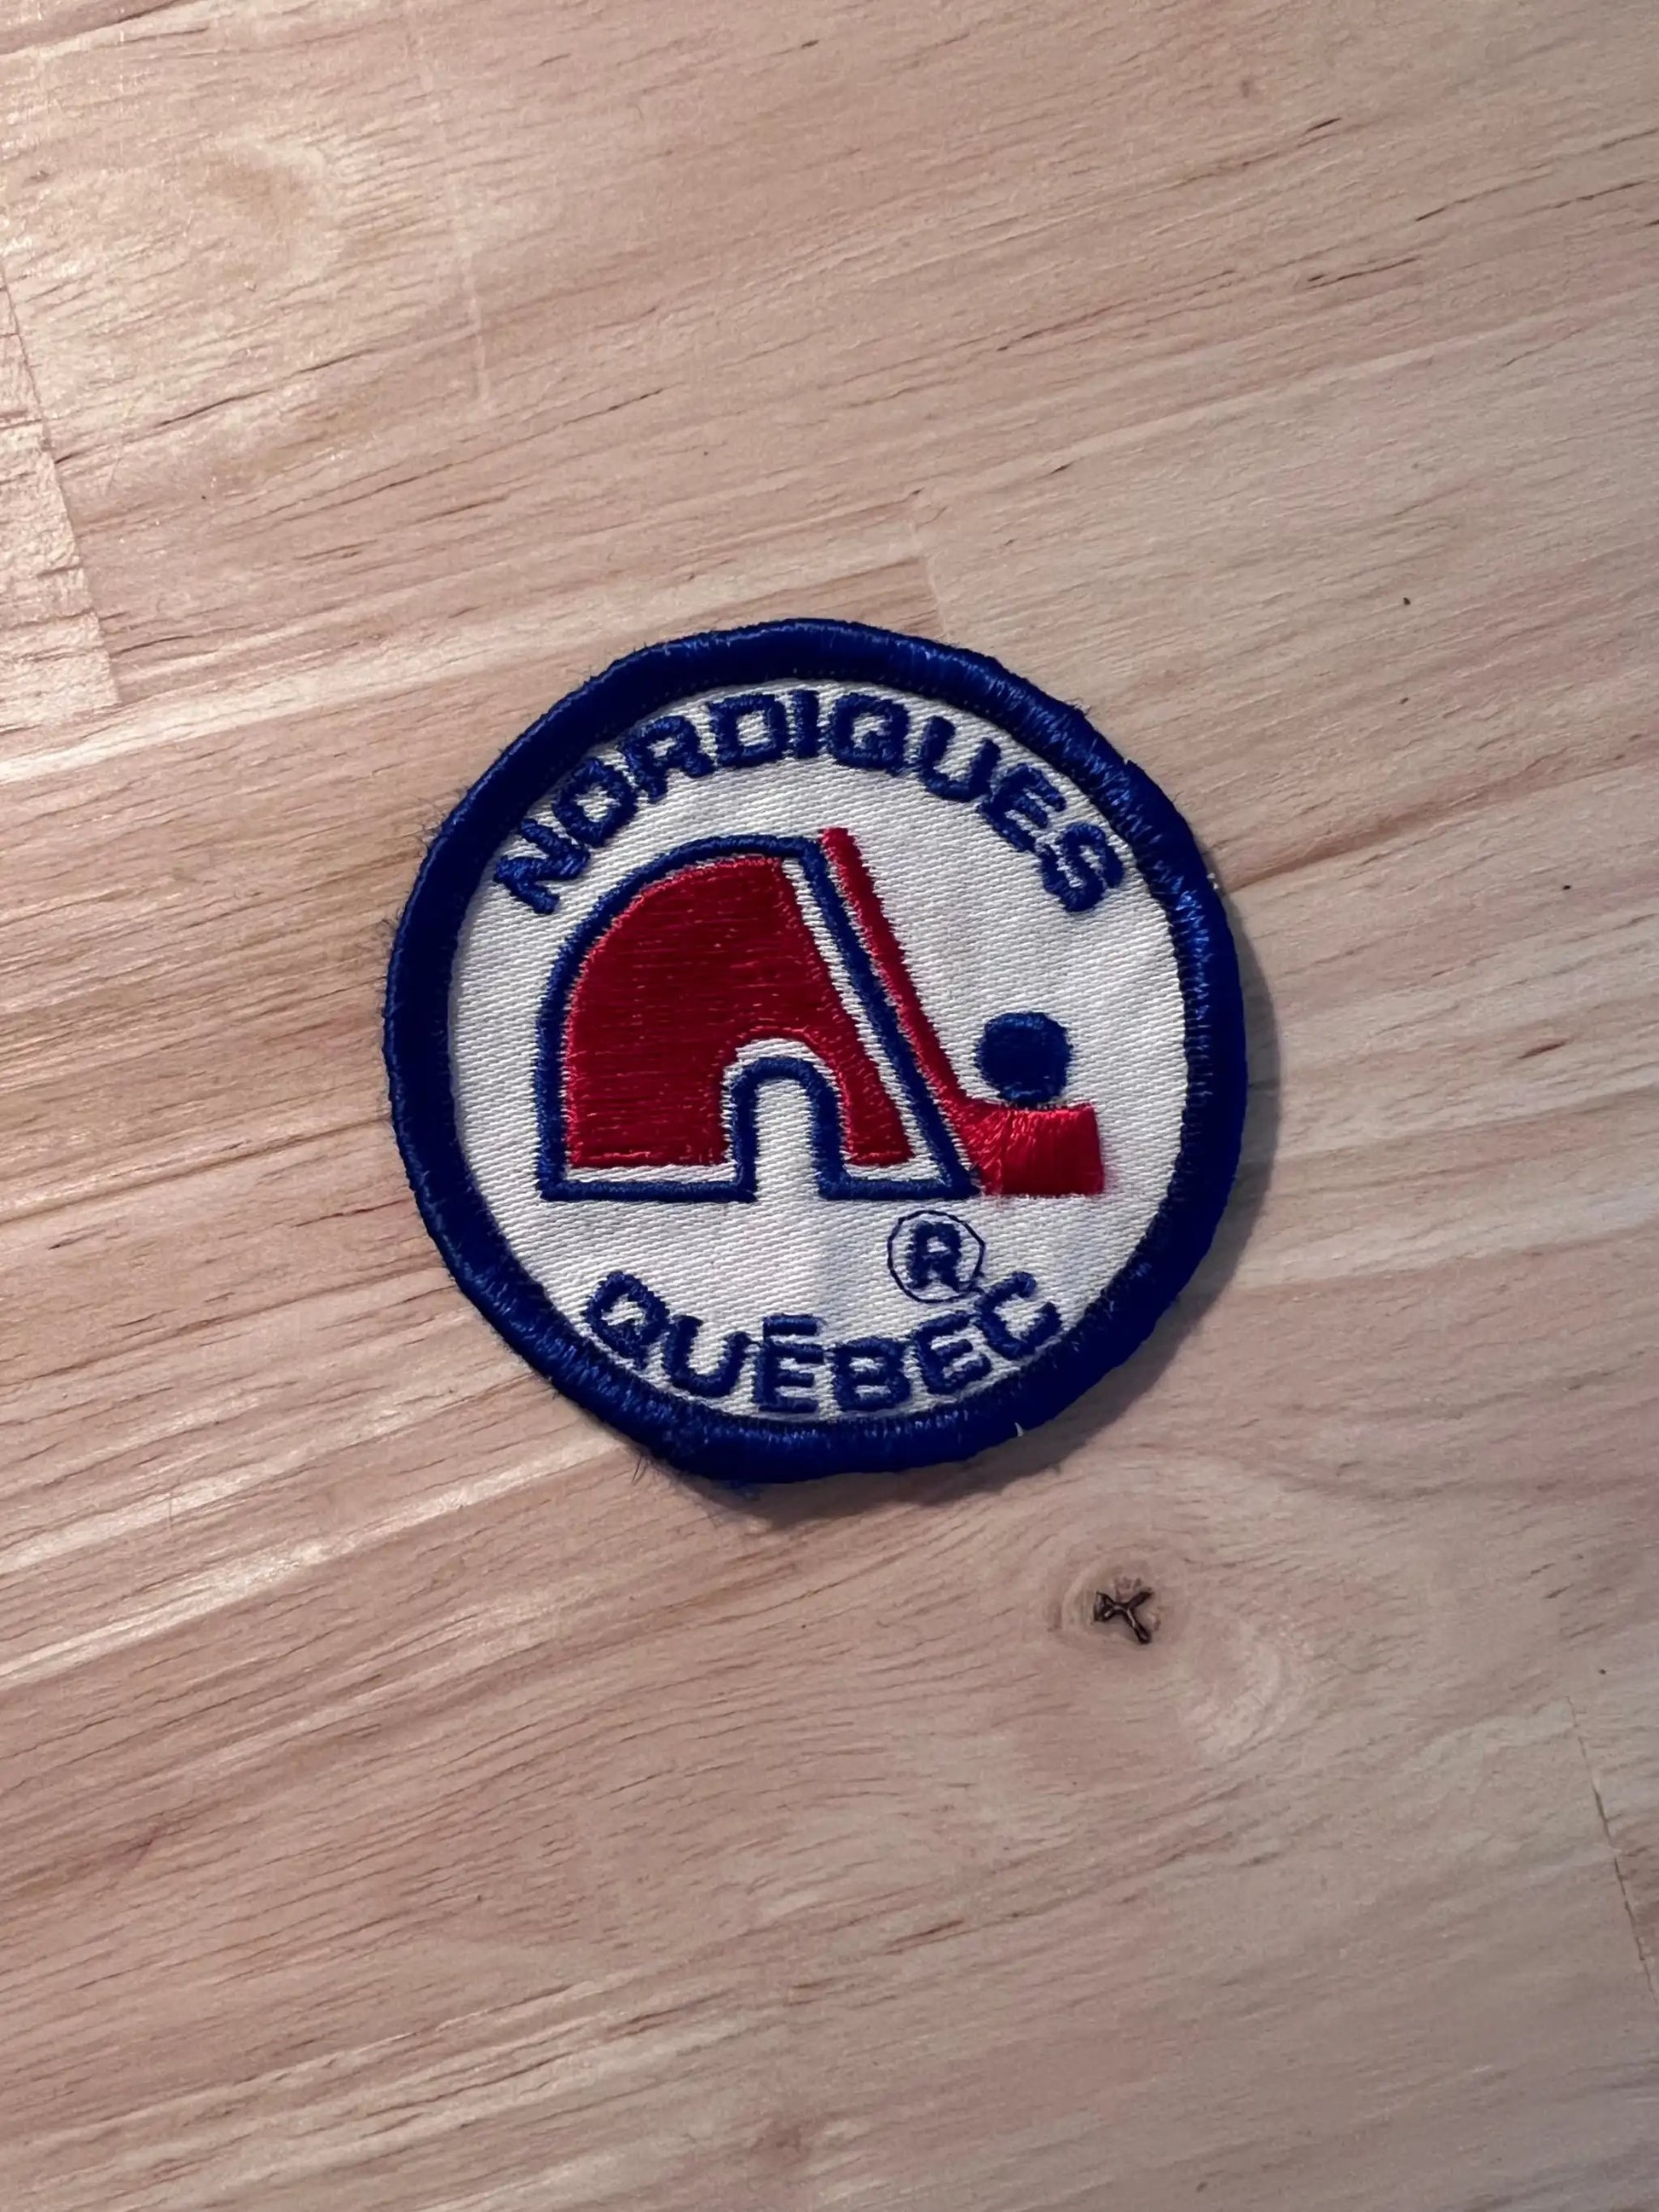 Quebec Nordiques Original NHL Vintage Patch New Od Stock Classic Mint Relic has been stored away for decades and measures approximately 2.5 inch circle